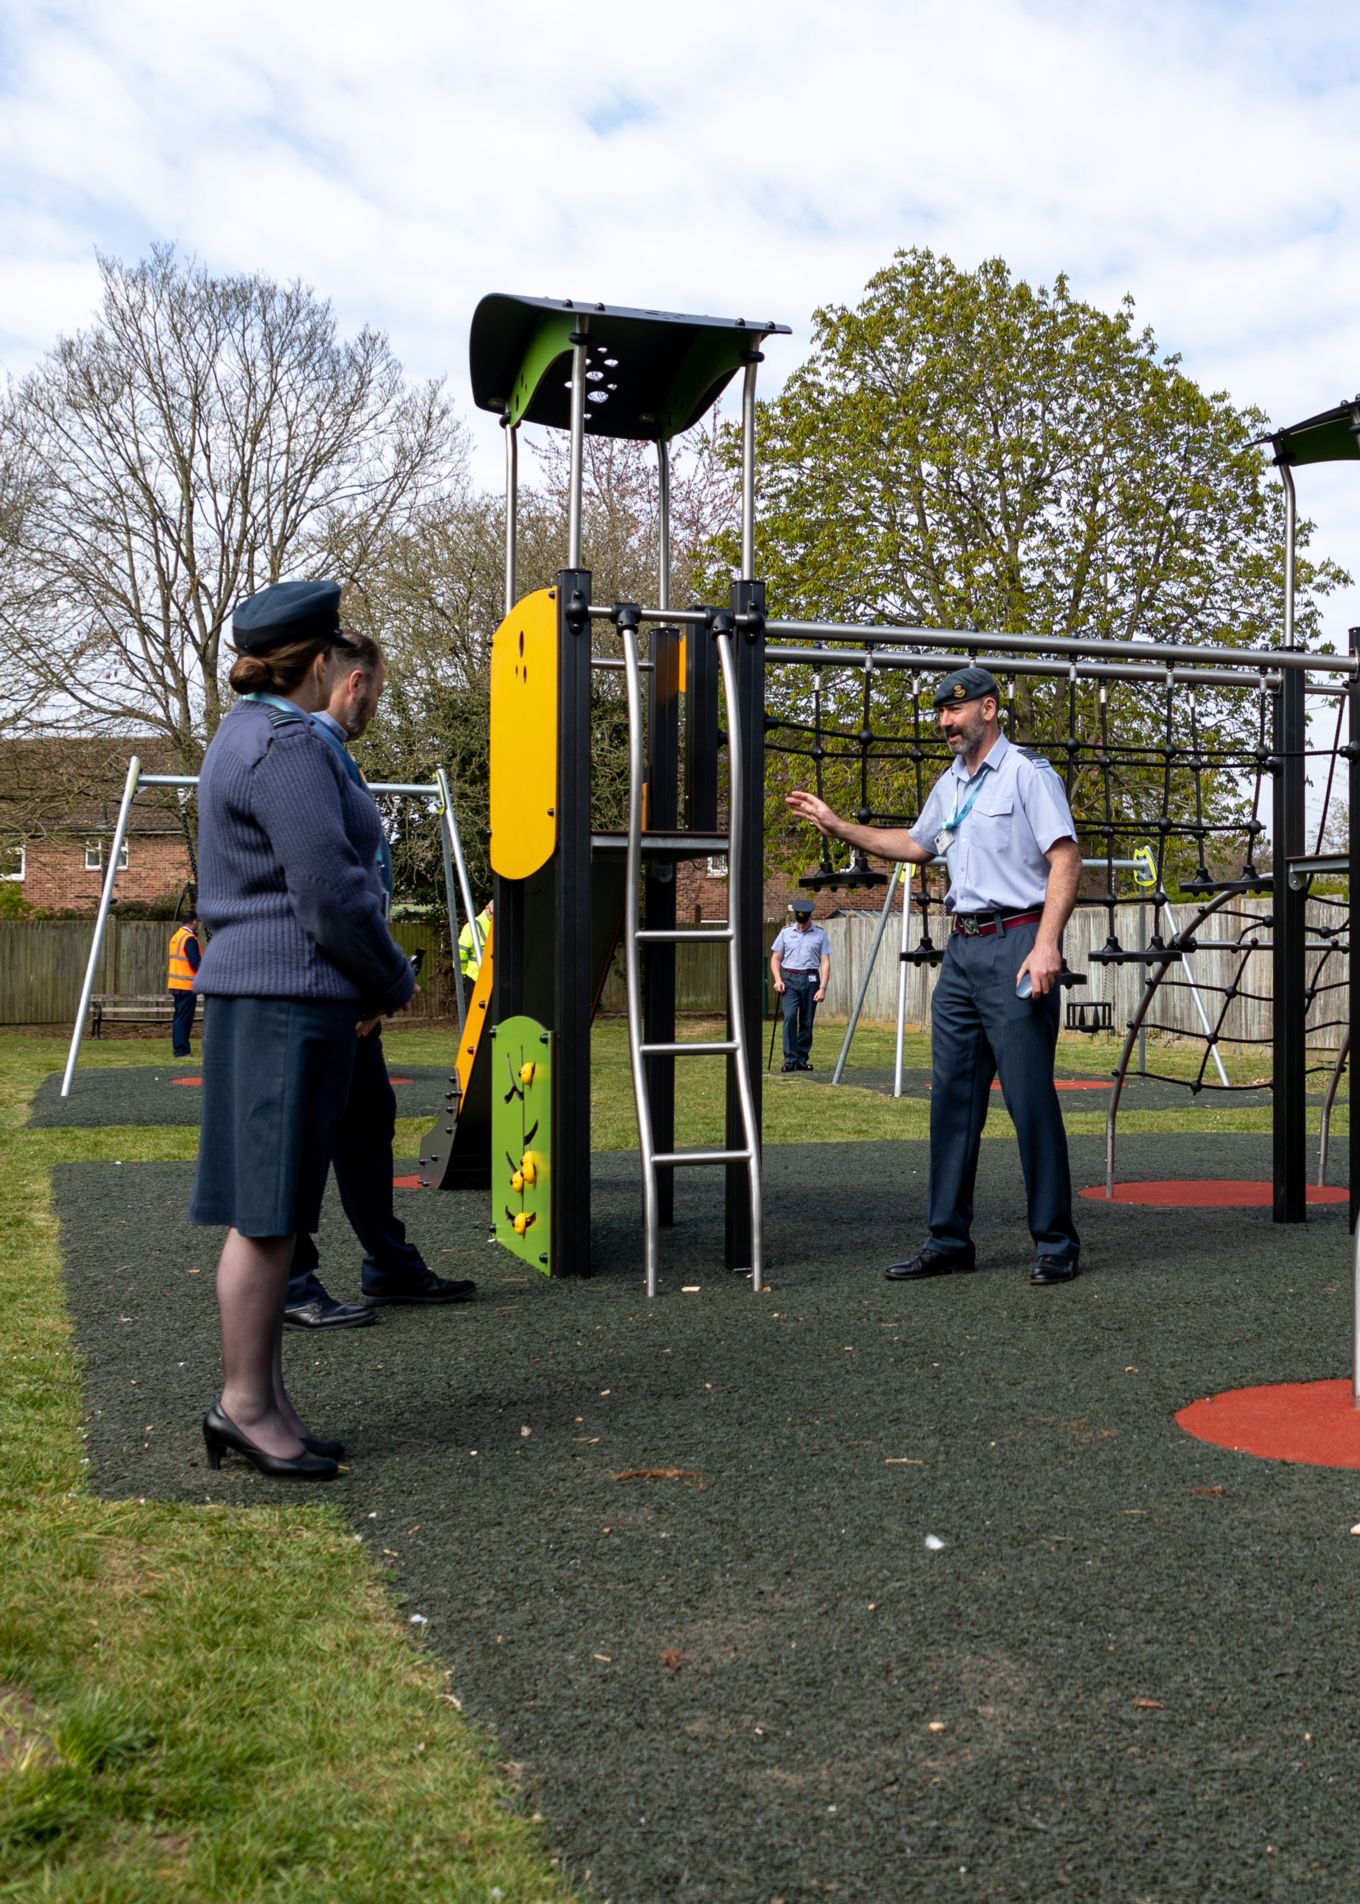 Station Commander checks out the new play equipment